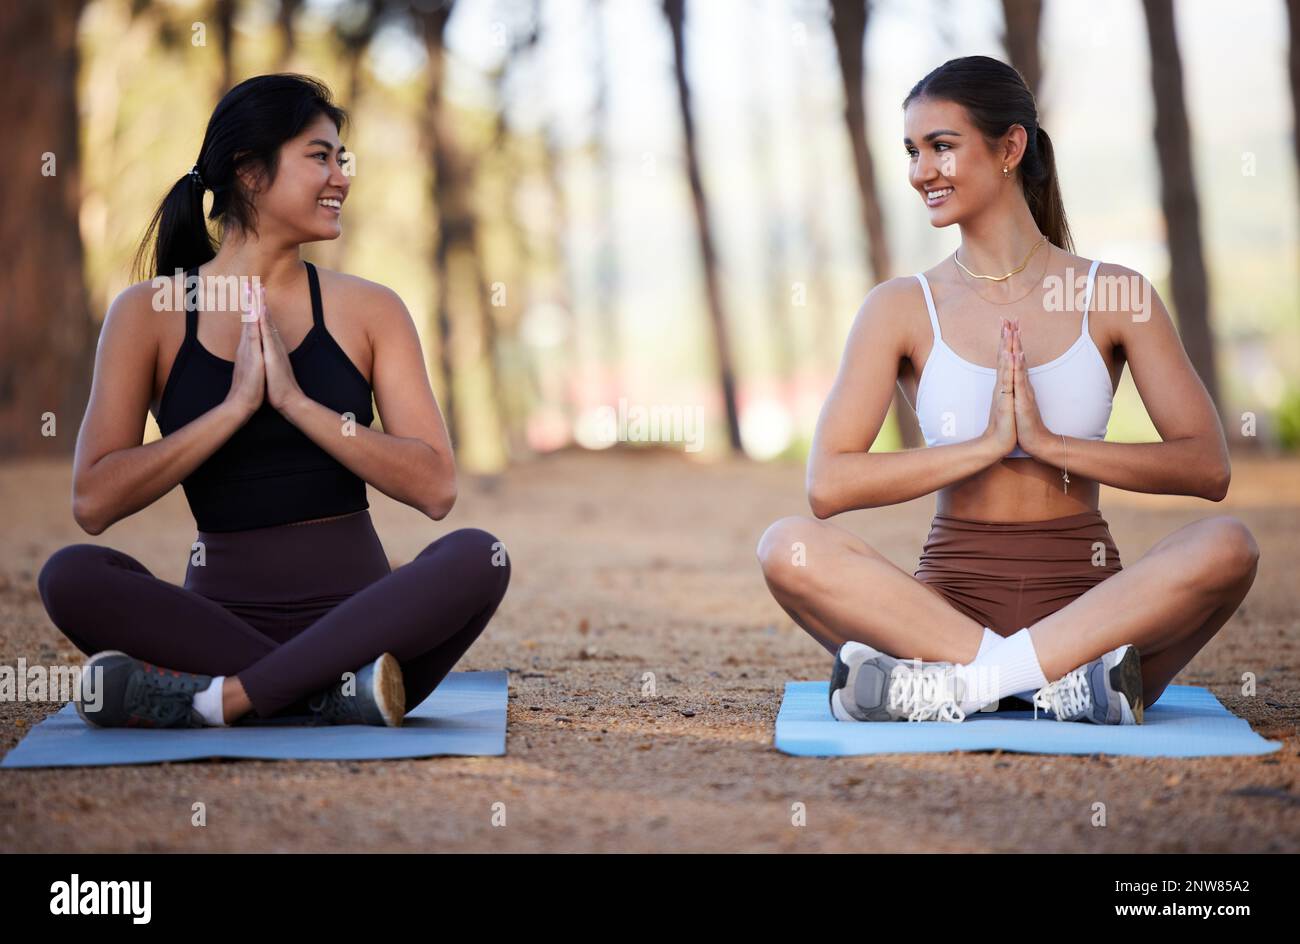 Yoga, outdoor meditation and women exercise in nature for fitness